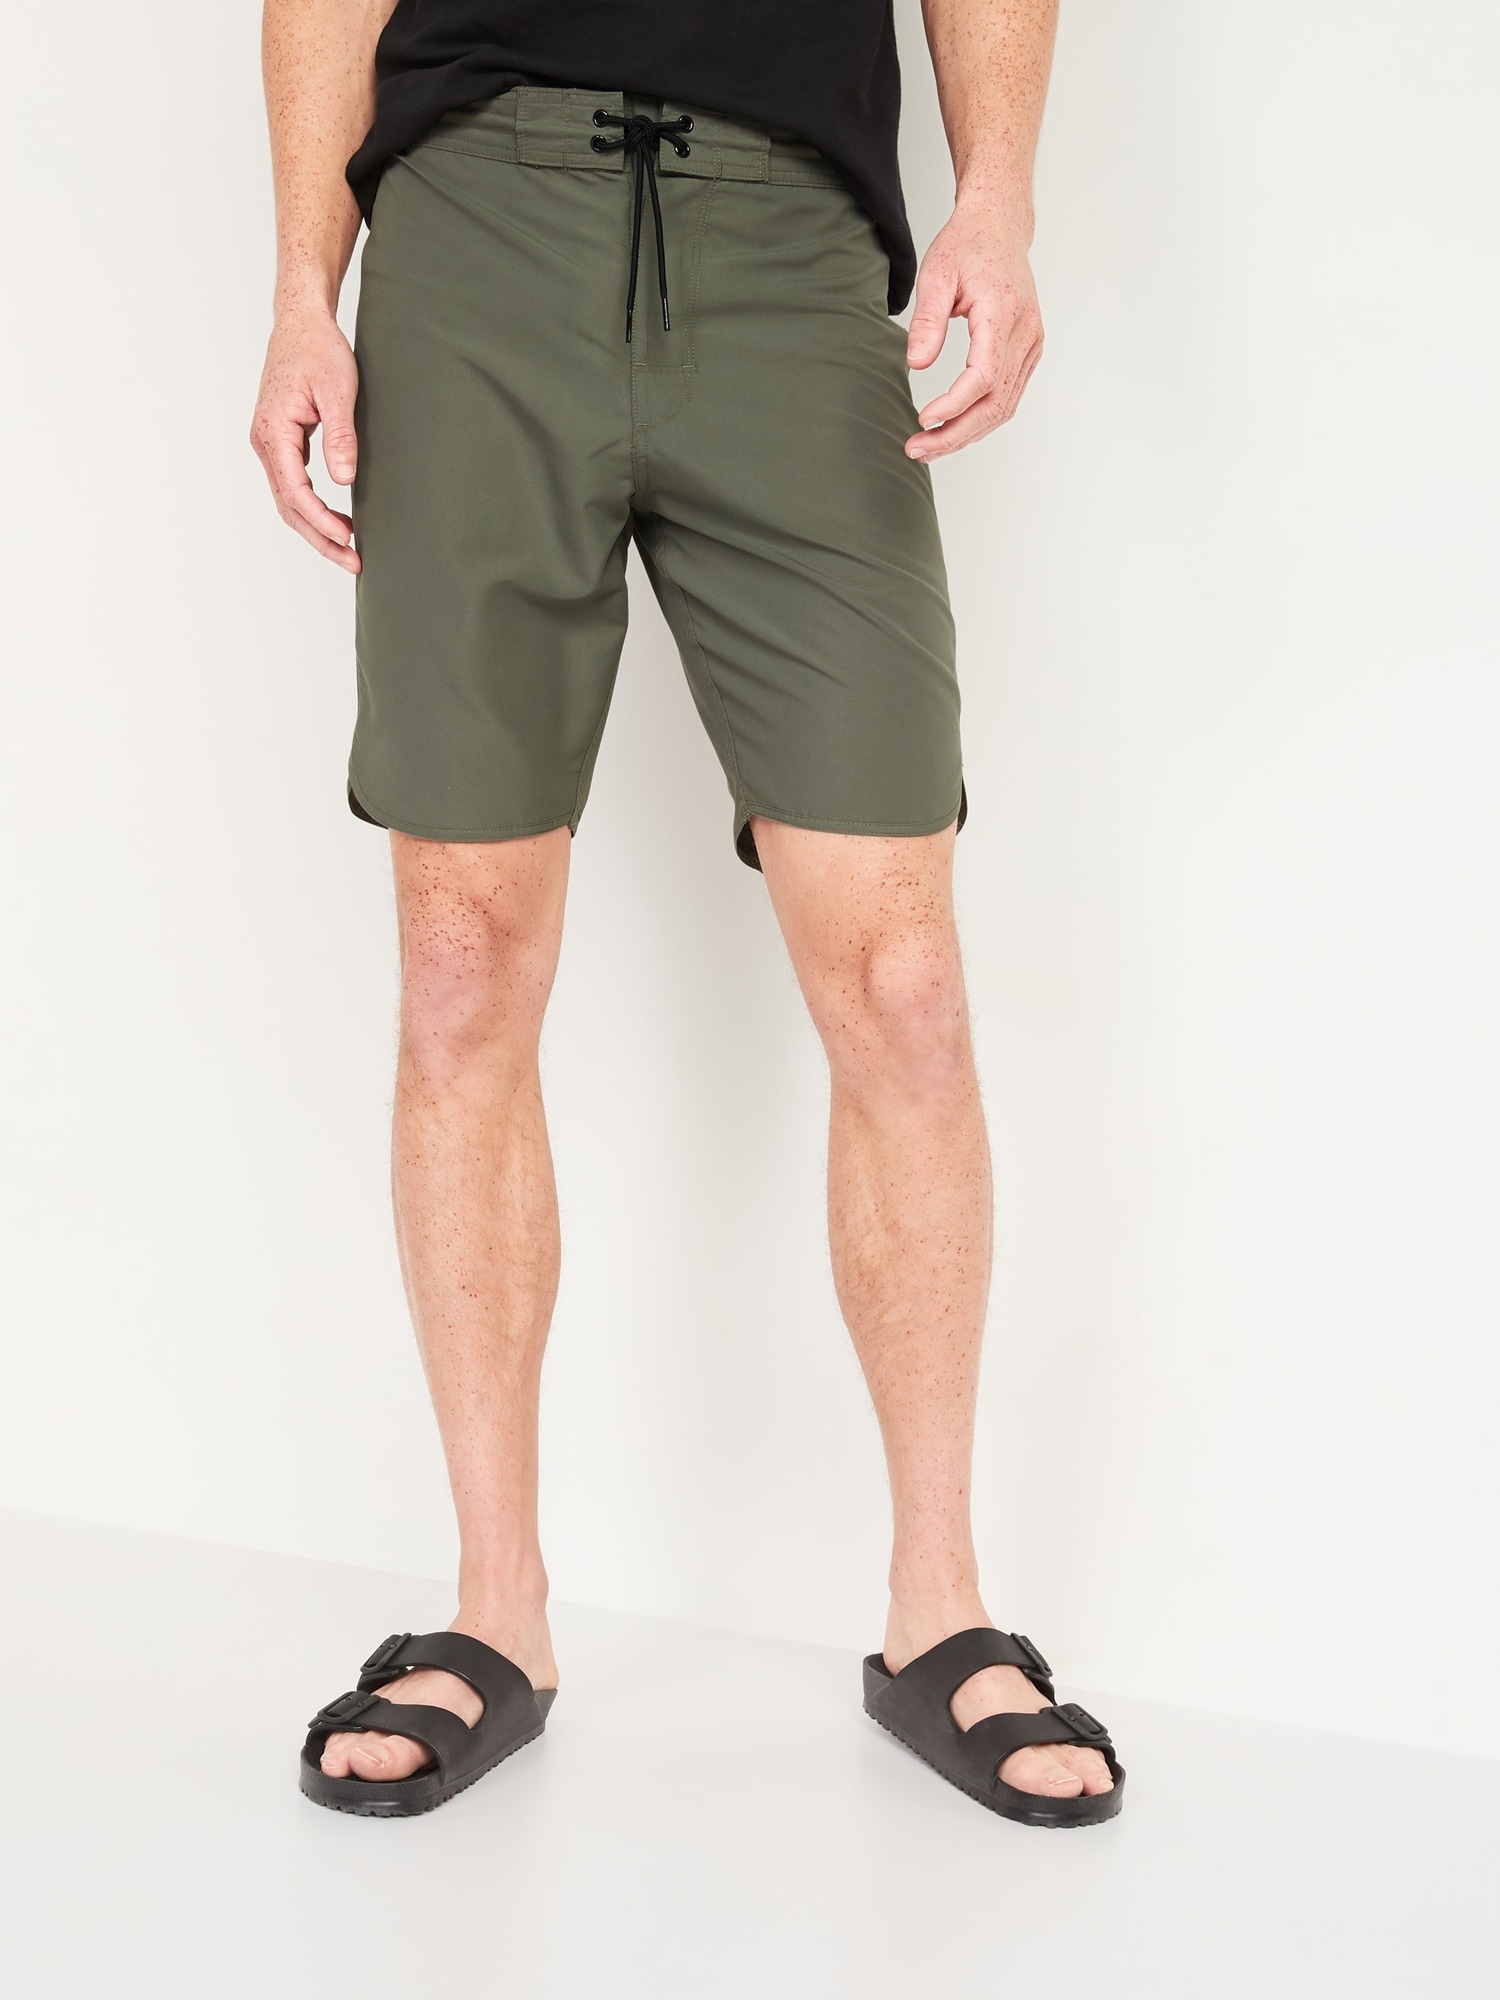 Solid-Color Dolphin-Hem Board Shorts for Men -- 10-inch inseam